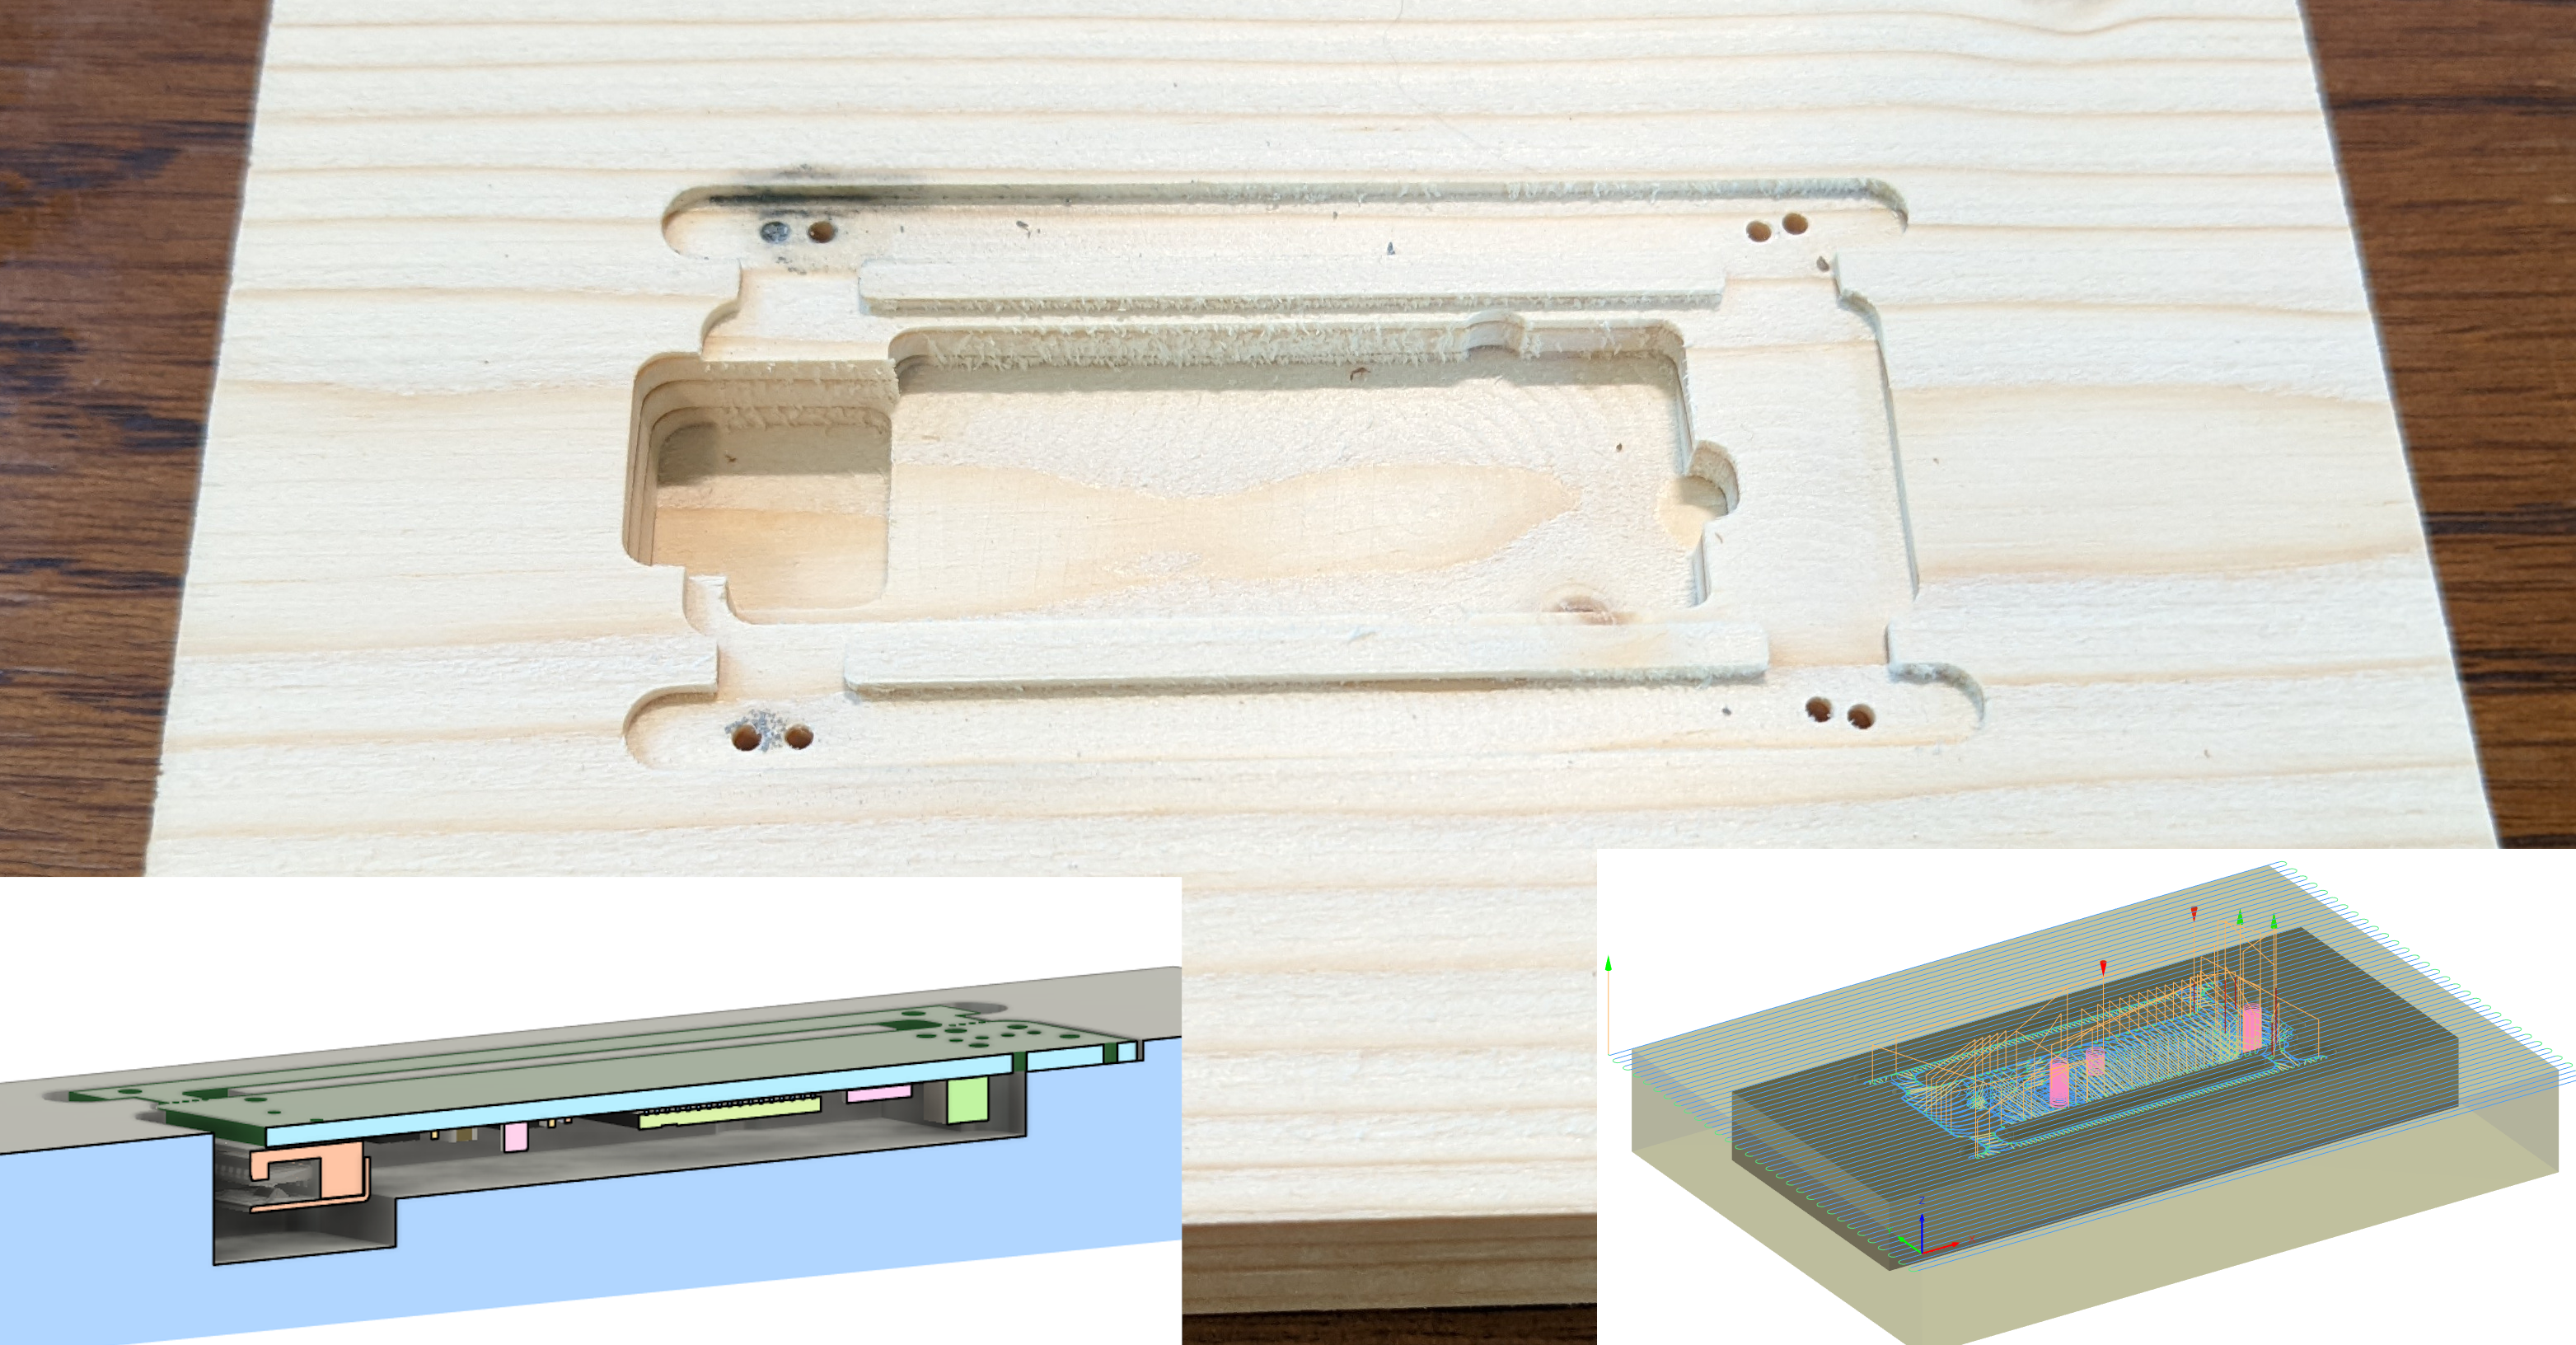 Top: Stencil alignment fixture, milled from a block of pine. It has a recess for the board, cavities for components, and alignment holes. Inset left: Stencil alignment cross section in CAD program, showing the board (w/ top side components already assembled) sitting flush with the surface of the stencil fixture. Inset right: Screenshot of toolpaths from CAM program.